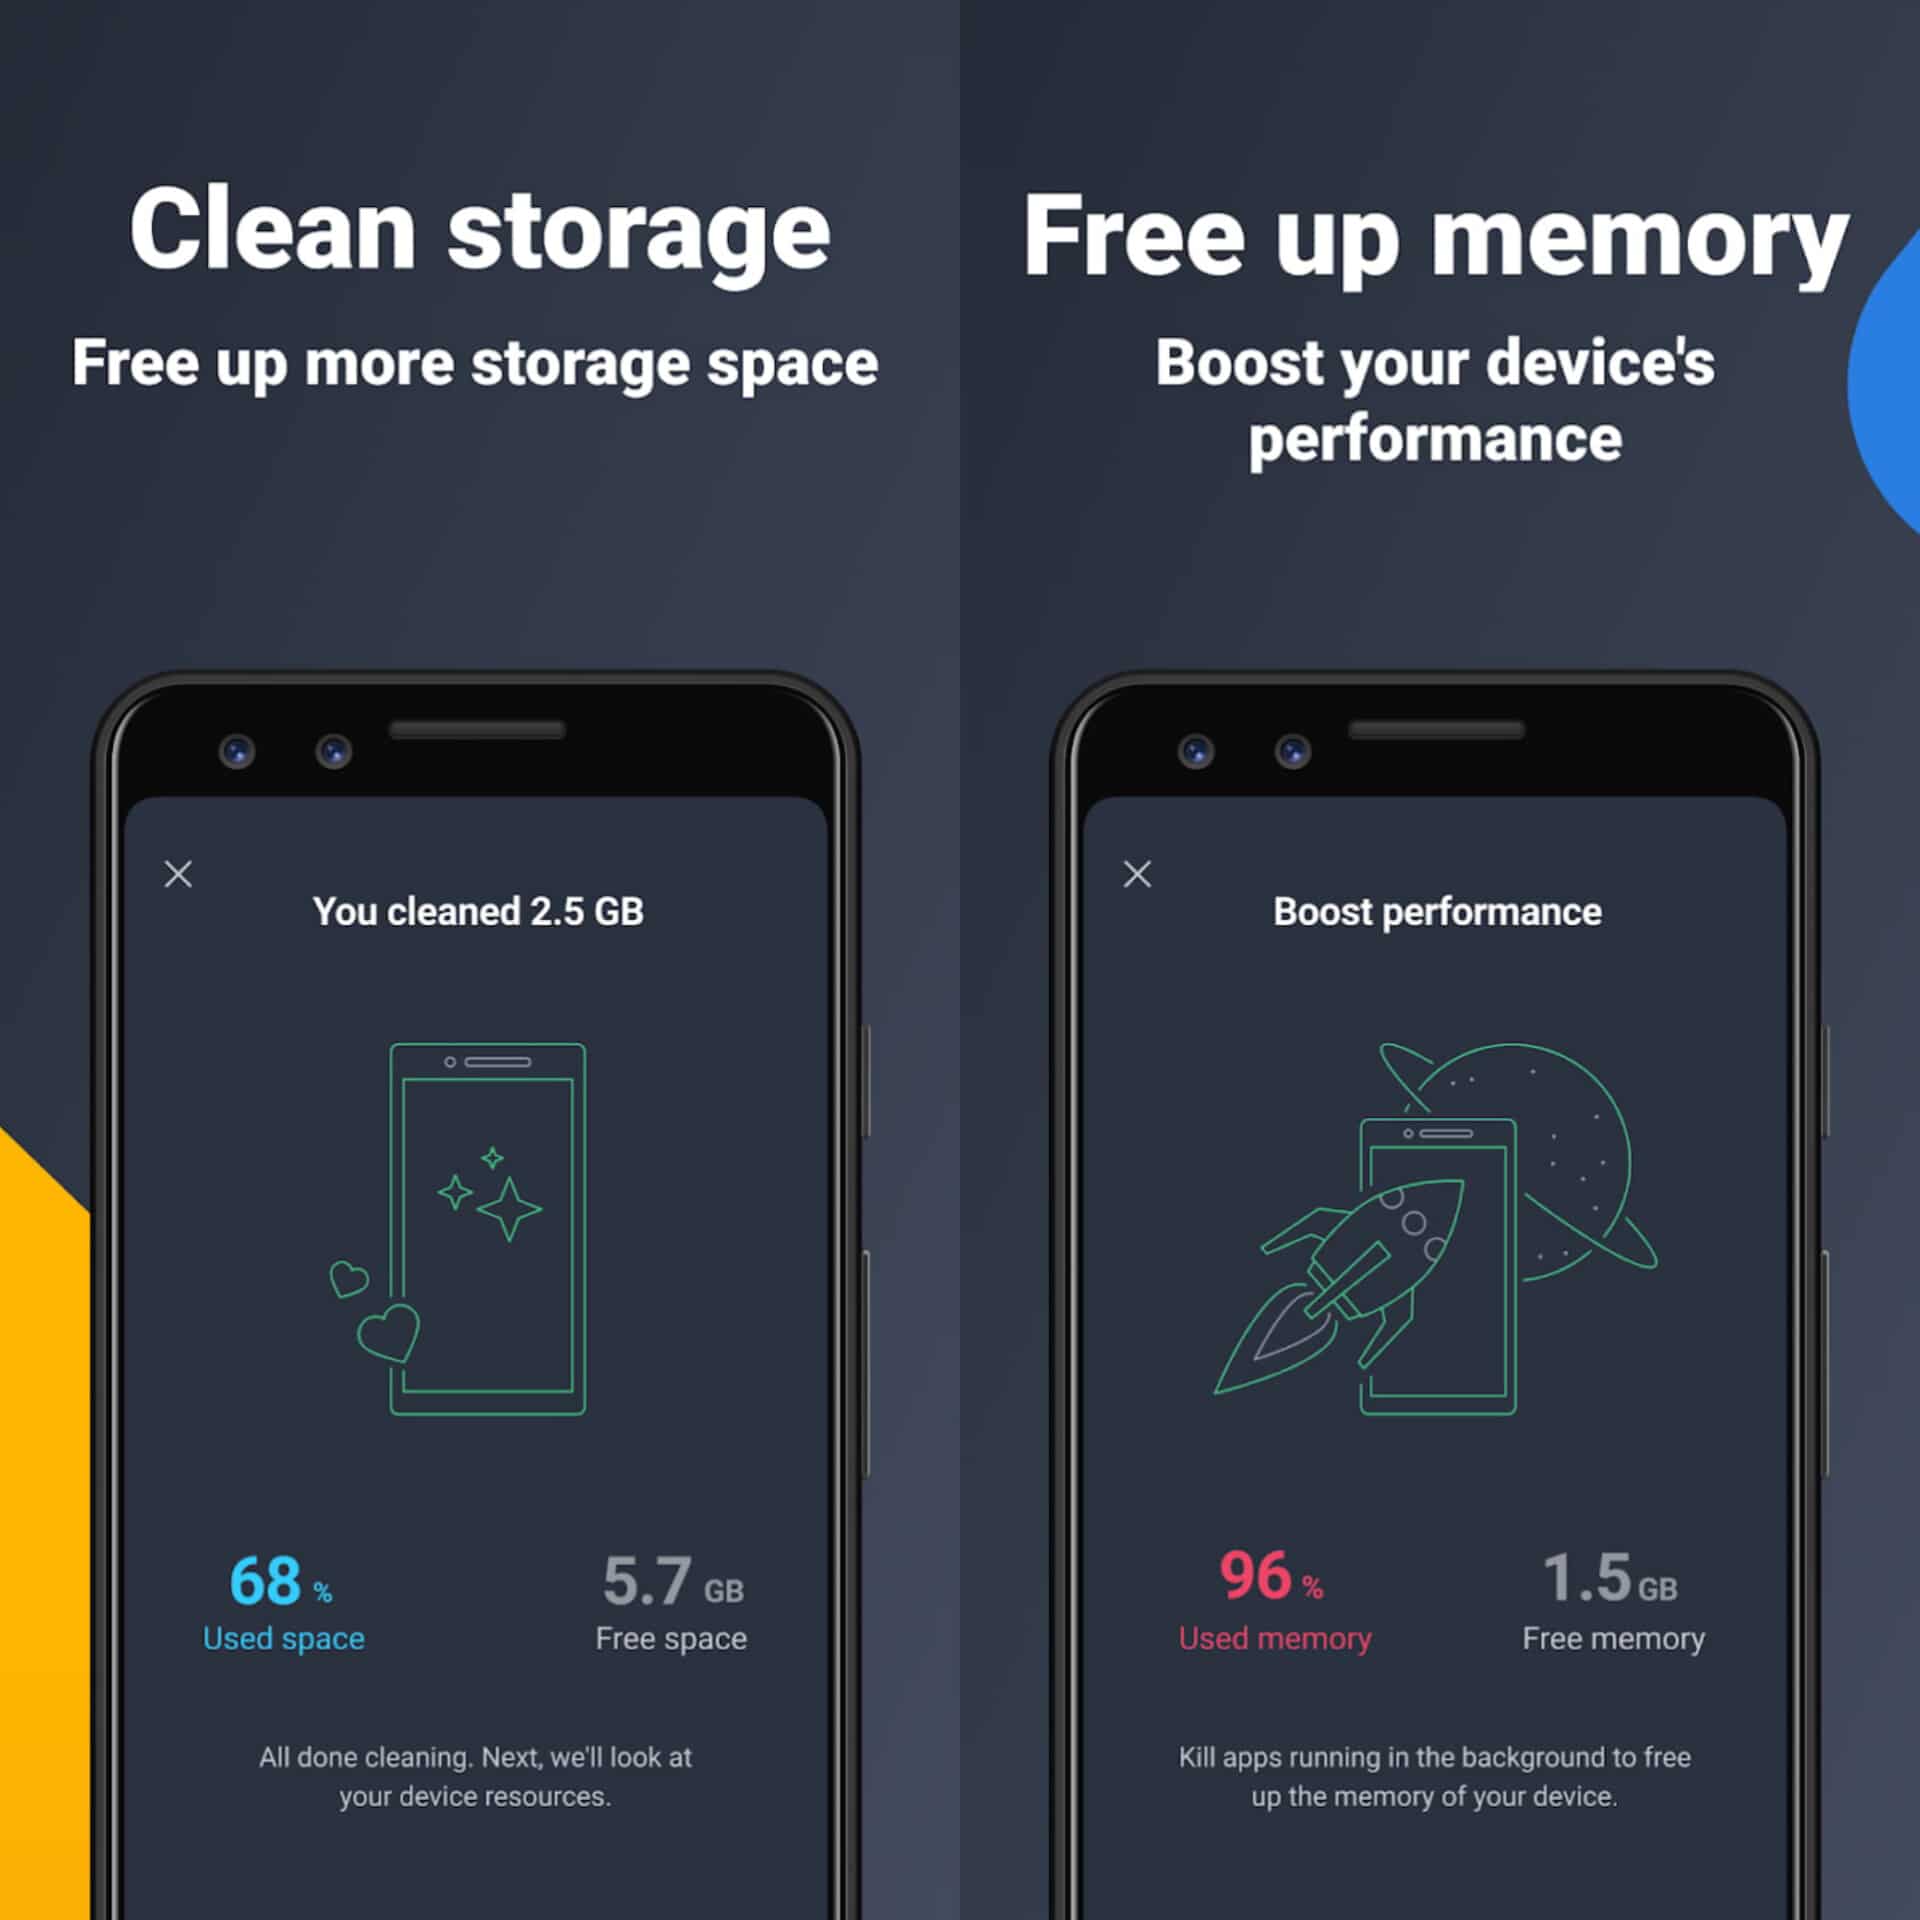 Download AVG Cleaner MOD APK to Clean Your Phone